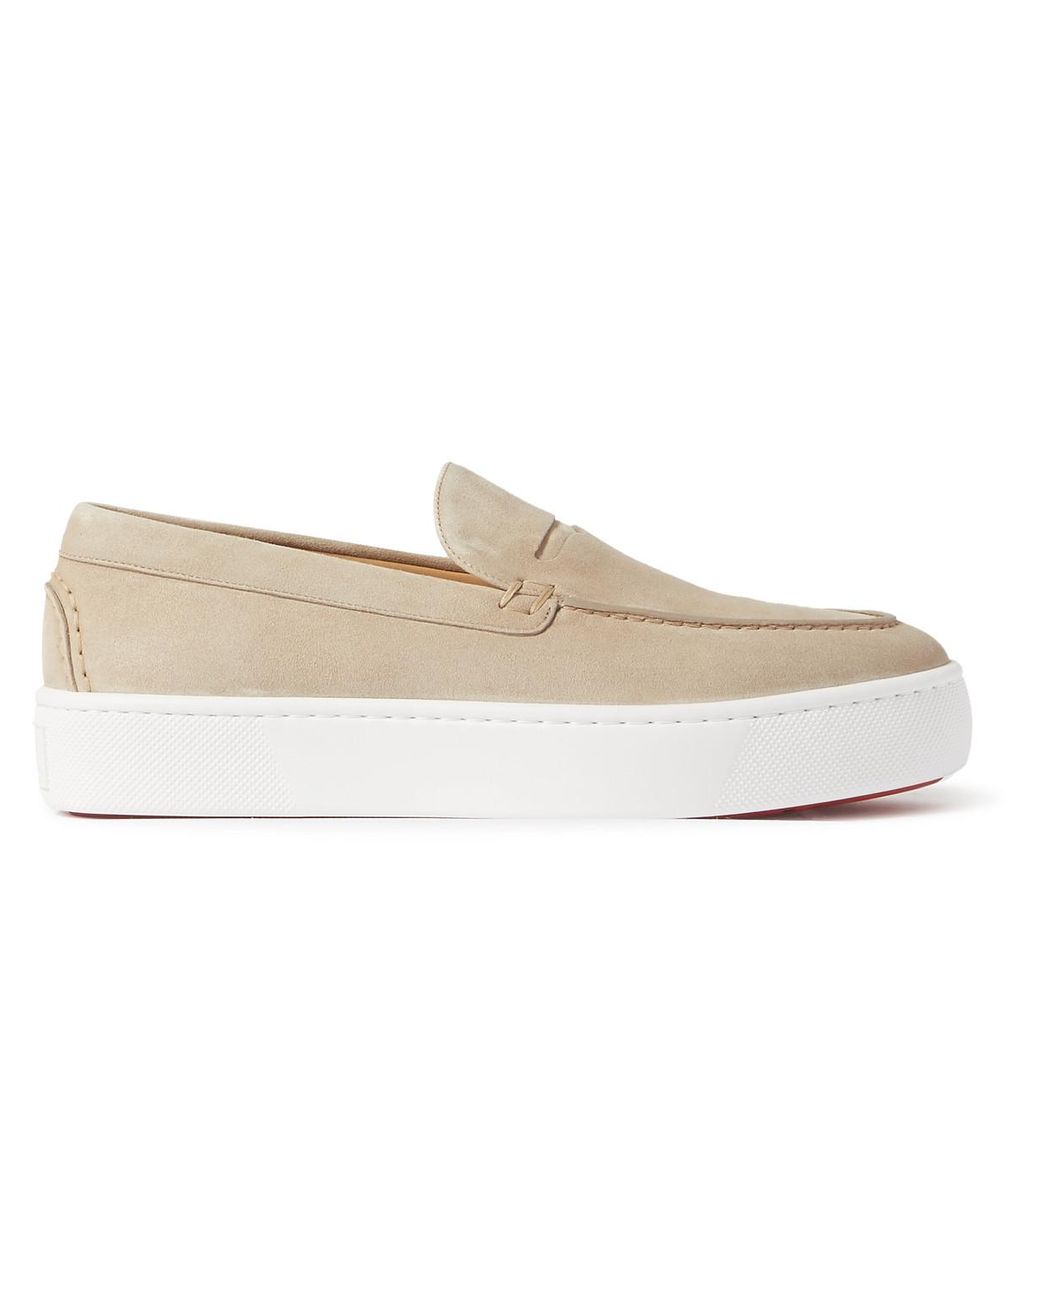 Christian Louboutin Paqueboat Suede Penny Loafers for Men | Lyst